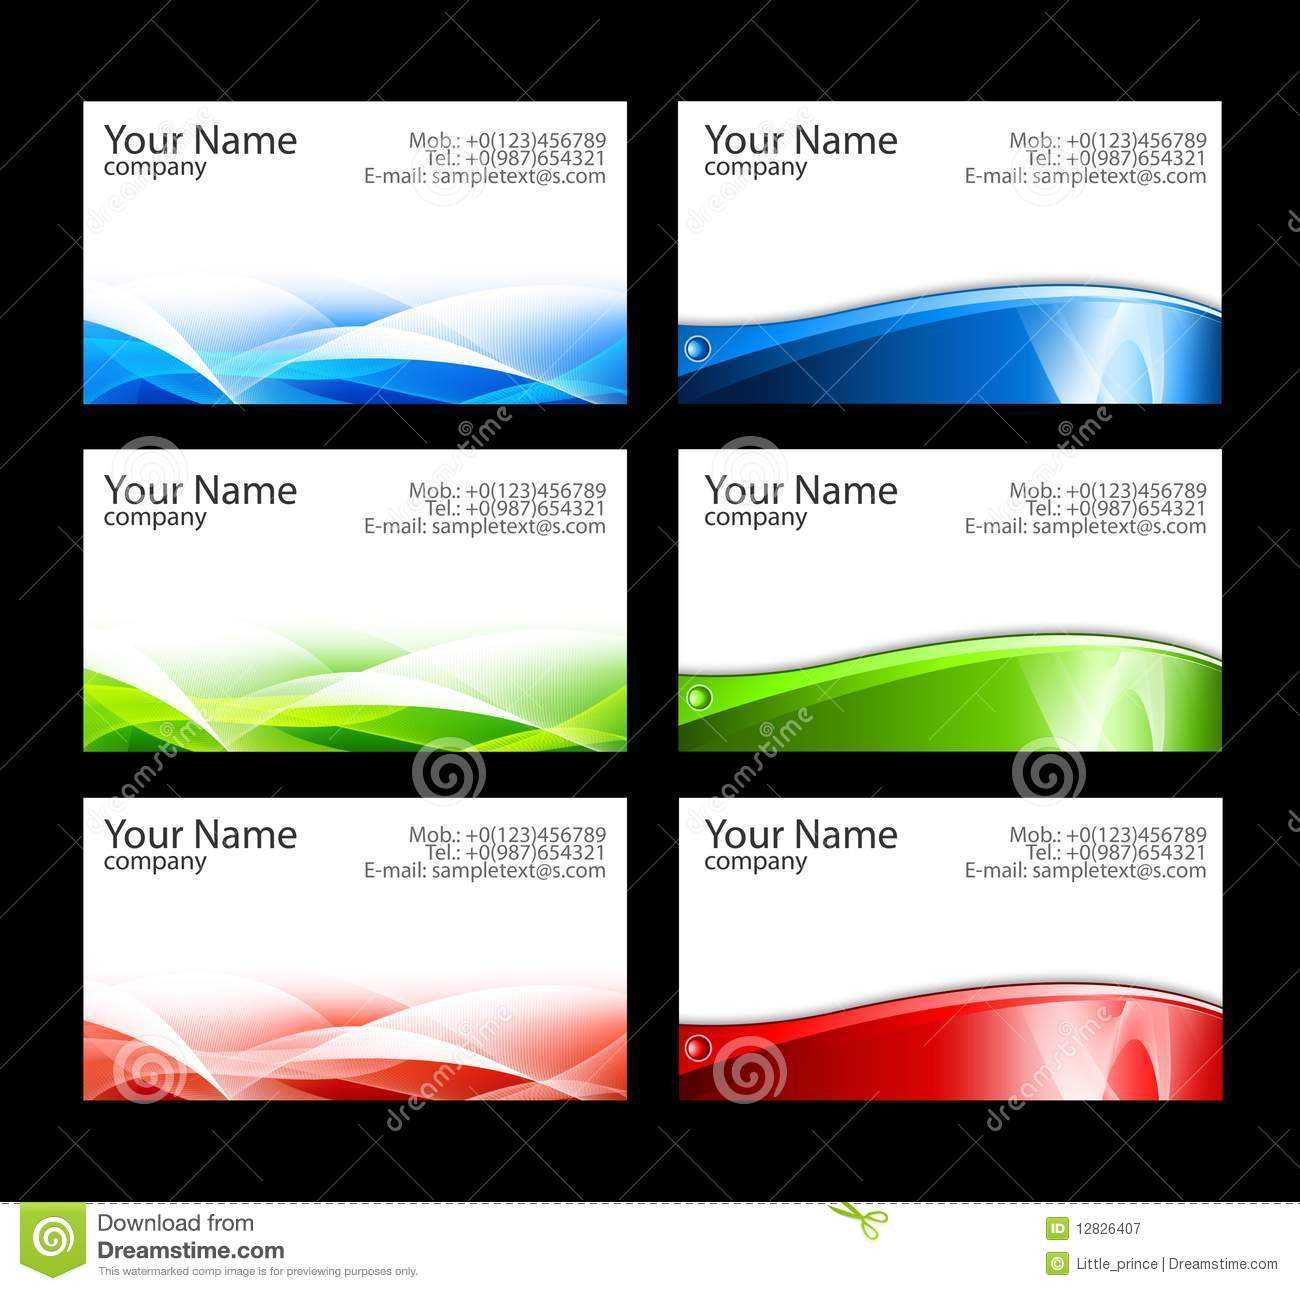 014 Template Ideas Business Cards Templates Free Wonderful With Regard To Call Card Templates